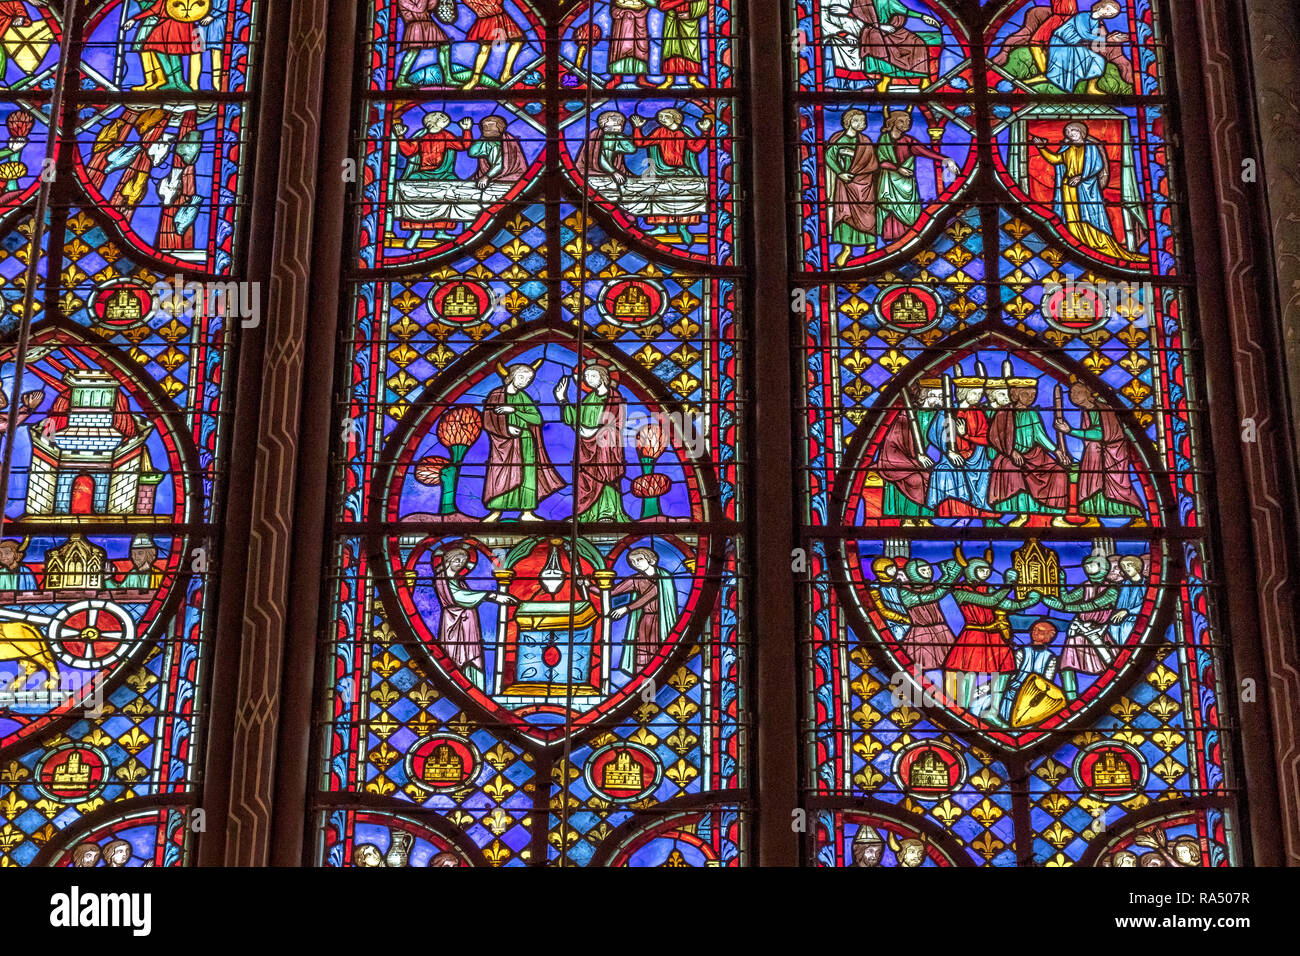 Detail of a stained glass window in Sainte-Chapelle , a royal chapel in the Gothic style, within the medieval Palais de la Cité , Paris Stock Photo